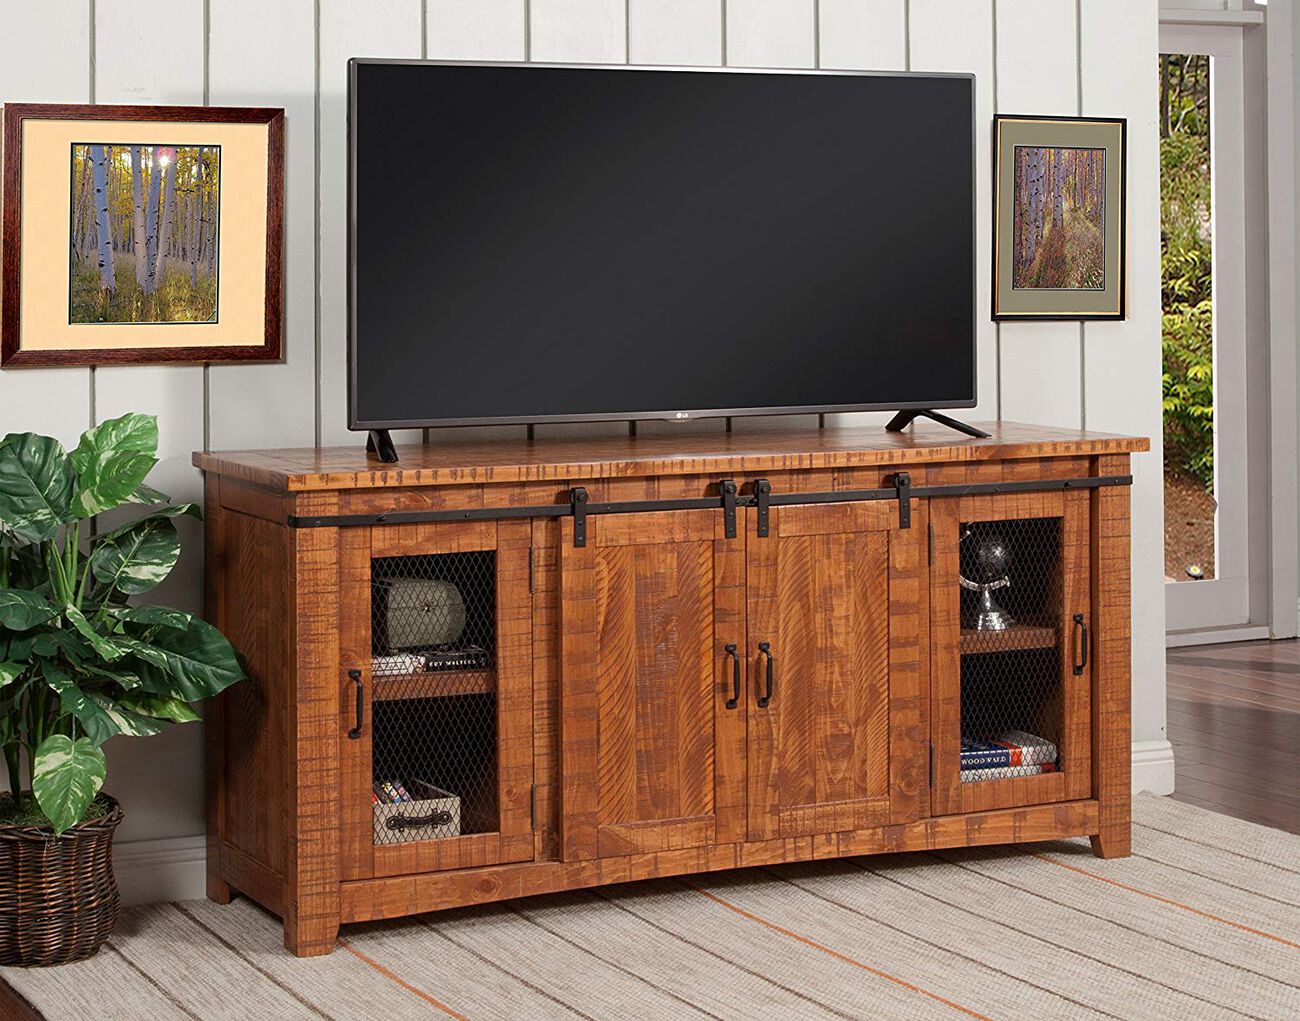 Wood and Metal TV Stand With 2 Mesh Style Doors, Honey Tobacco Brown